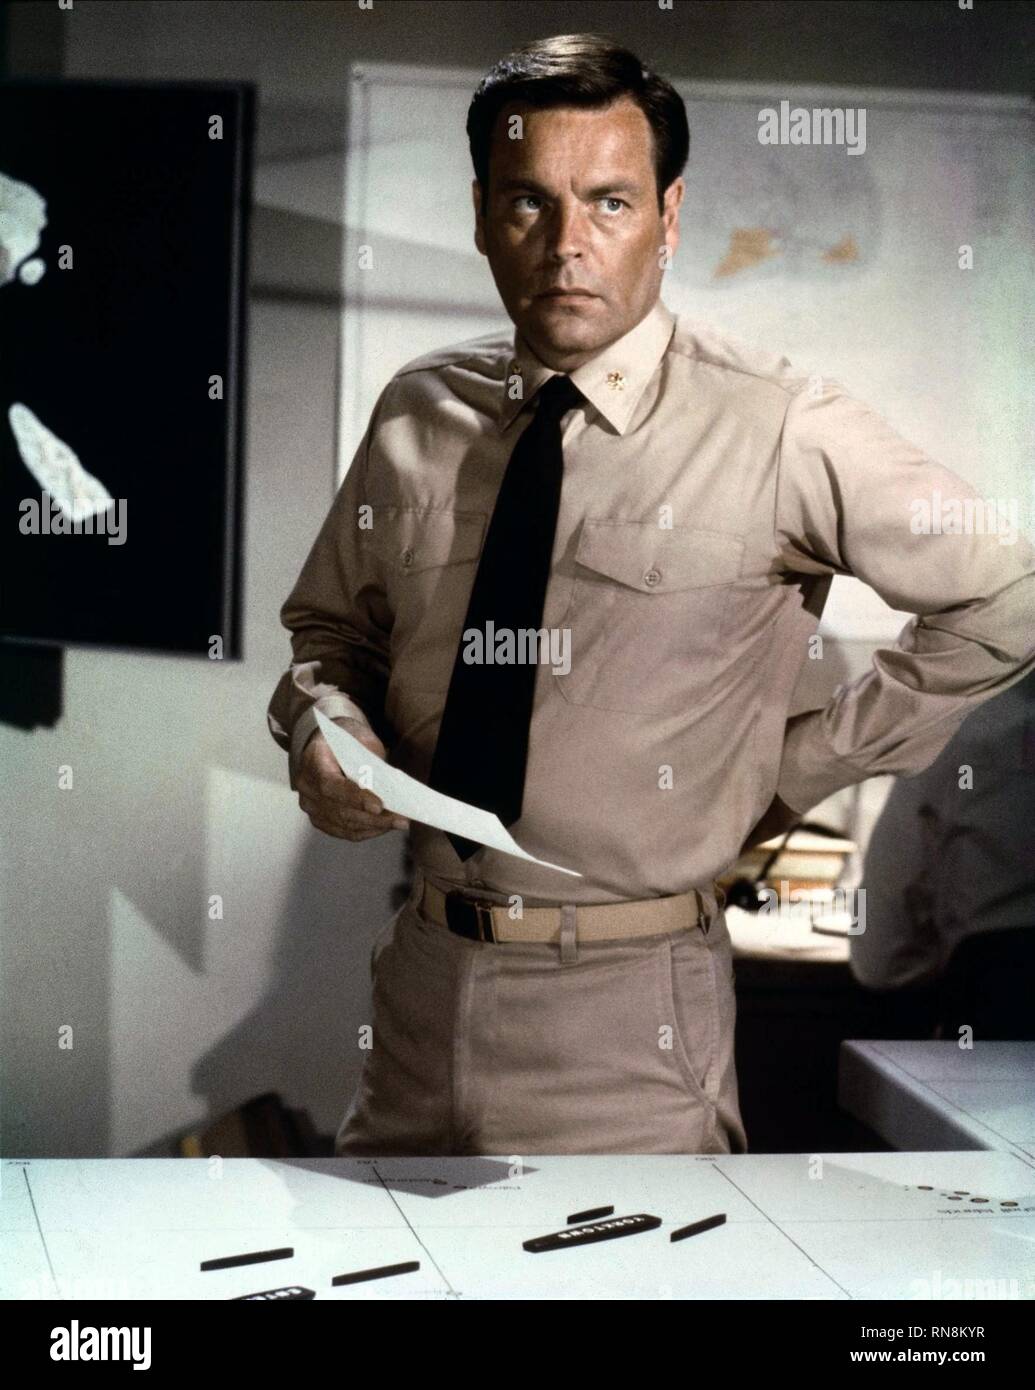 ROBERT WAGNER, THE BATTLE OF MIDWAY, 1976 Stock Photo